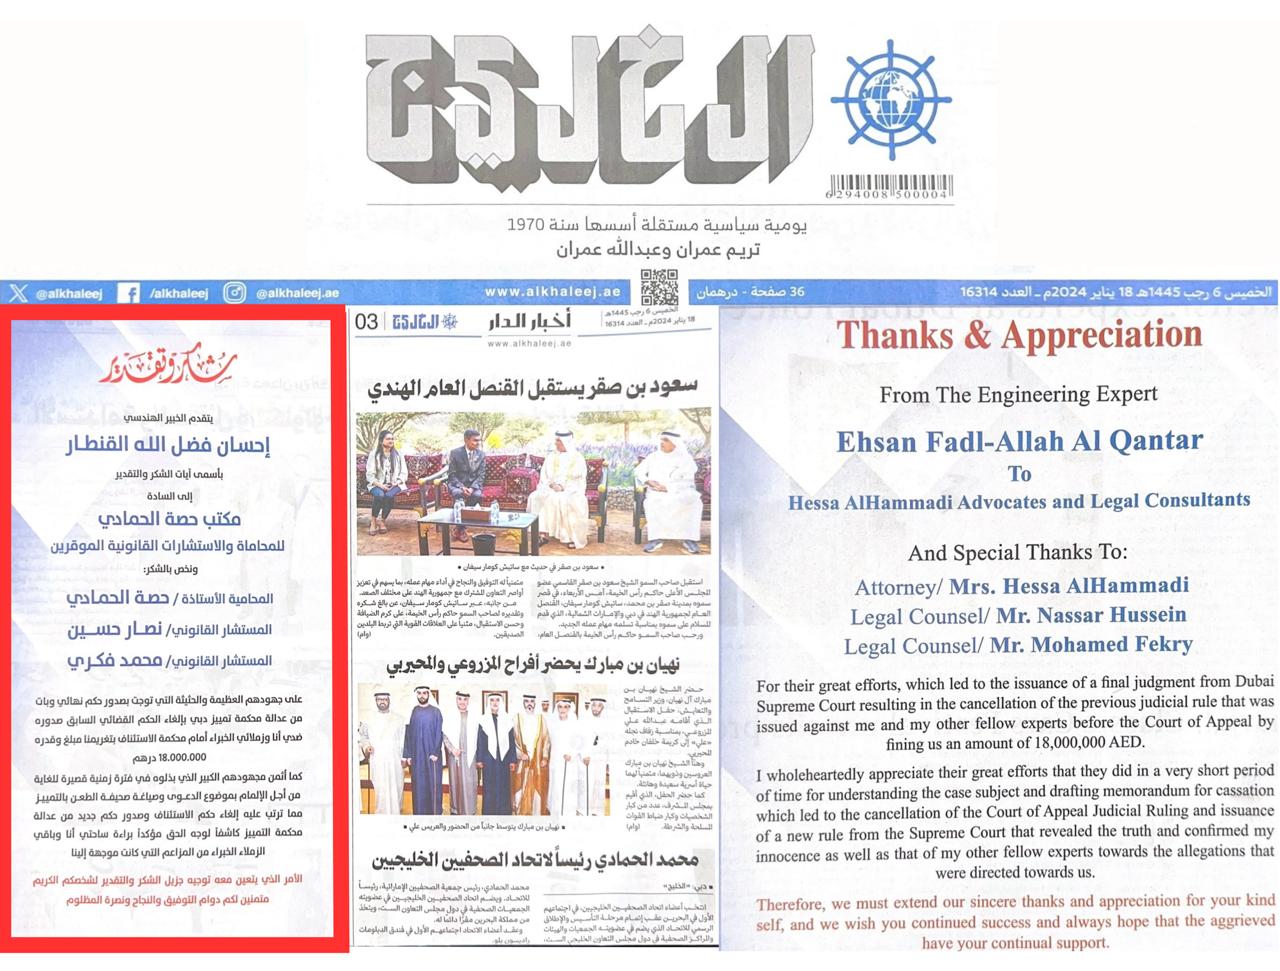 “Appreciation notes were published by the engineering experts in leading newspapers in the UAE expressing their gratitude for Hessa Al Hammadi Advocates & Legal Consultants which obtained landmark ruling in Cassation Courts in Dubai which led to overturning of Appeal Courts ruling which obliged the experts to pay compensation of 18 million dirhams” 